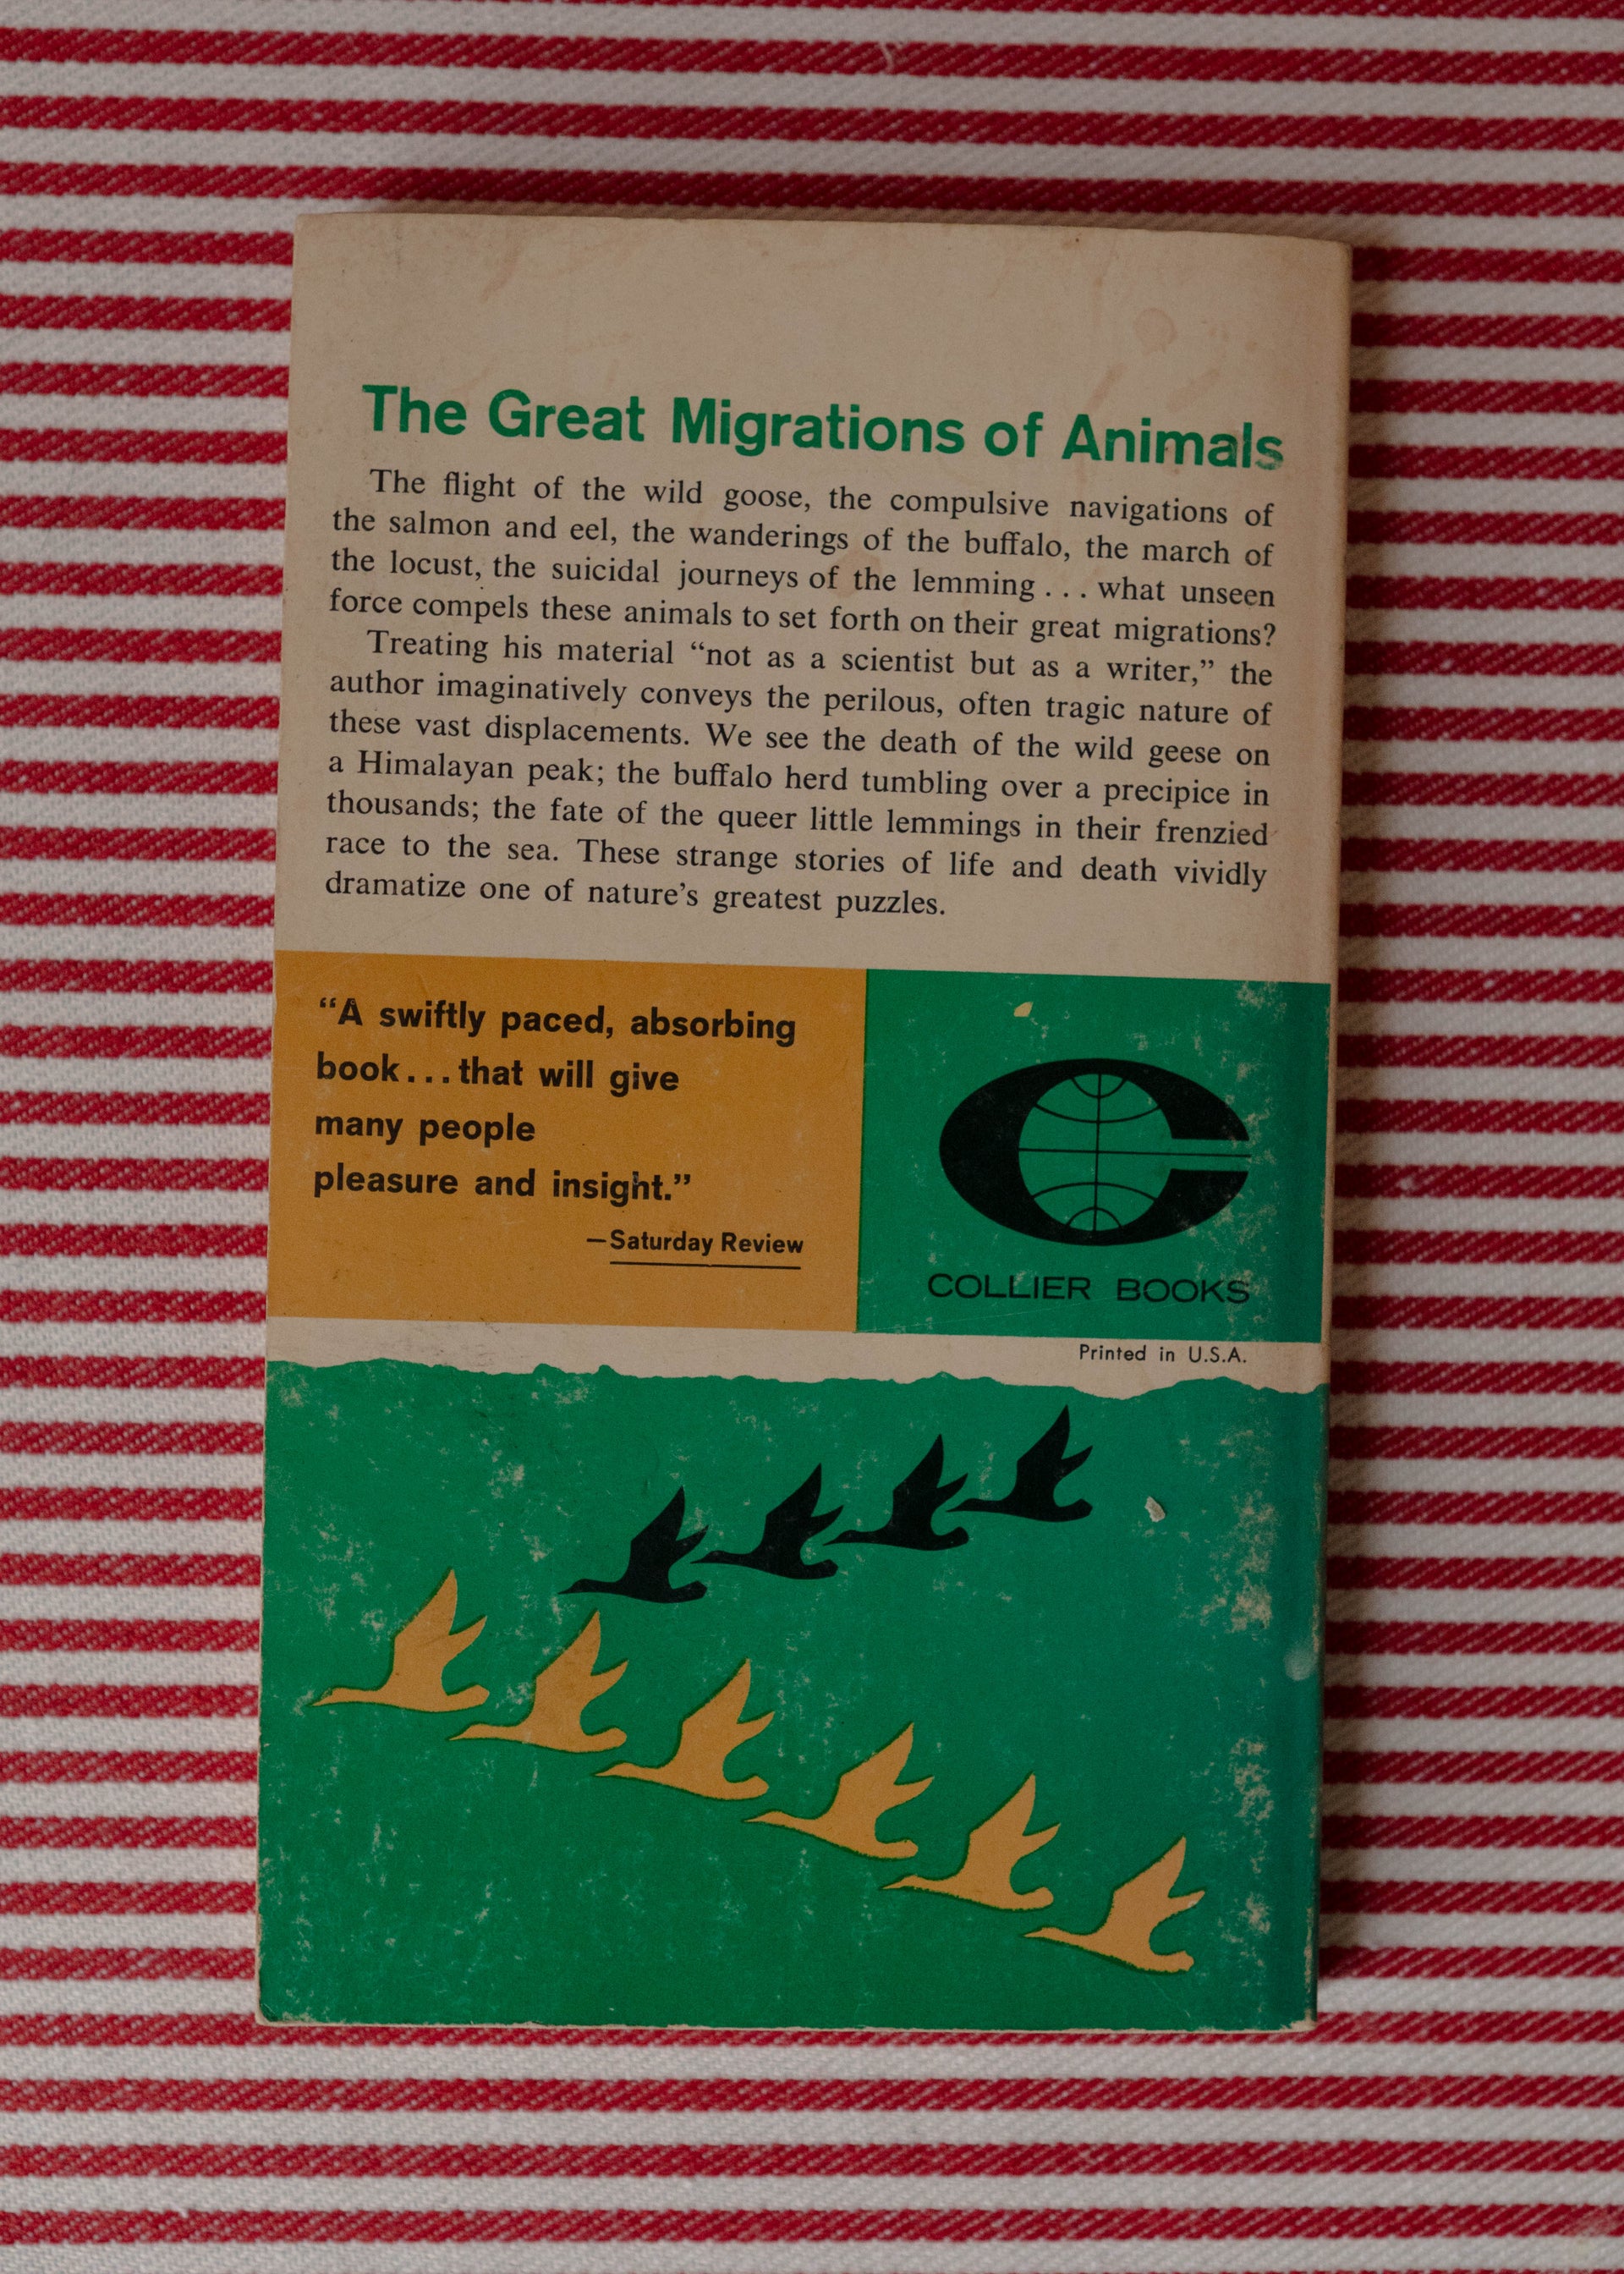 The Great Migrations of Animals